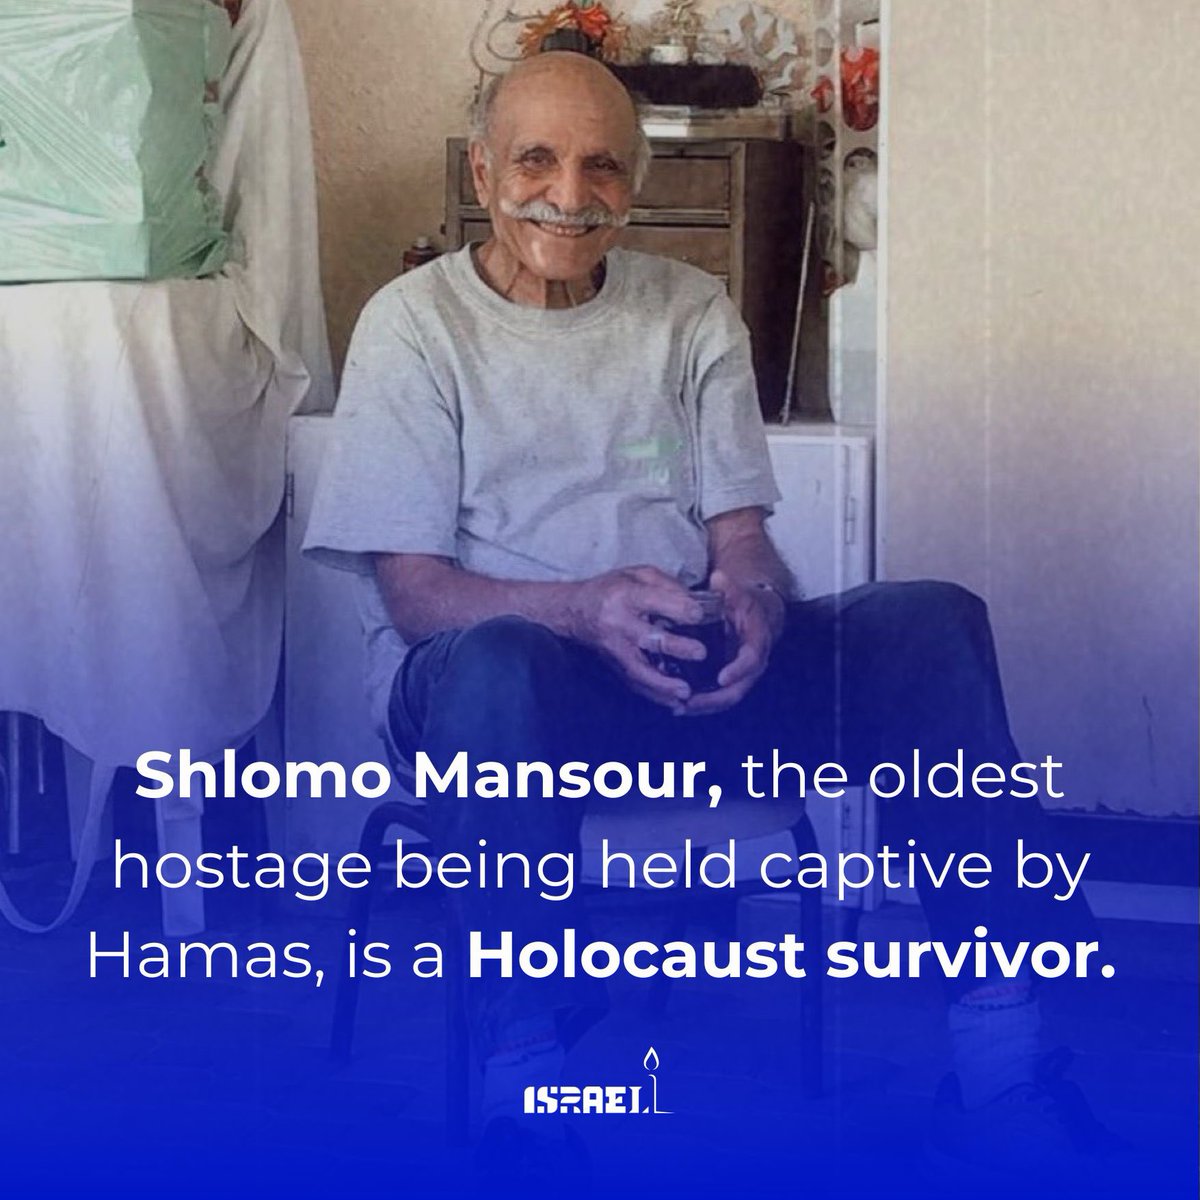 Shlomo Mansour 86, survived the Farhoud Pogrom as a young boy in Iraq. He has been held hostage in Gaza by Hamas for 213 days. #LetThemGoNow